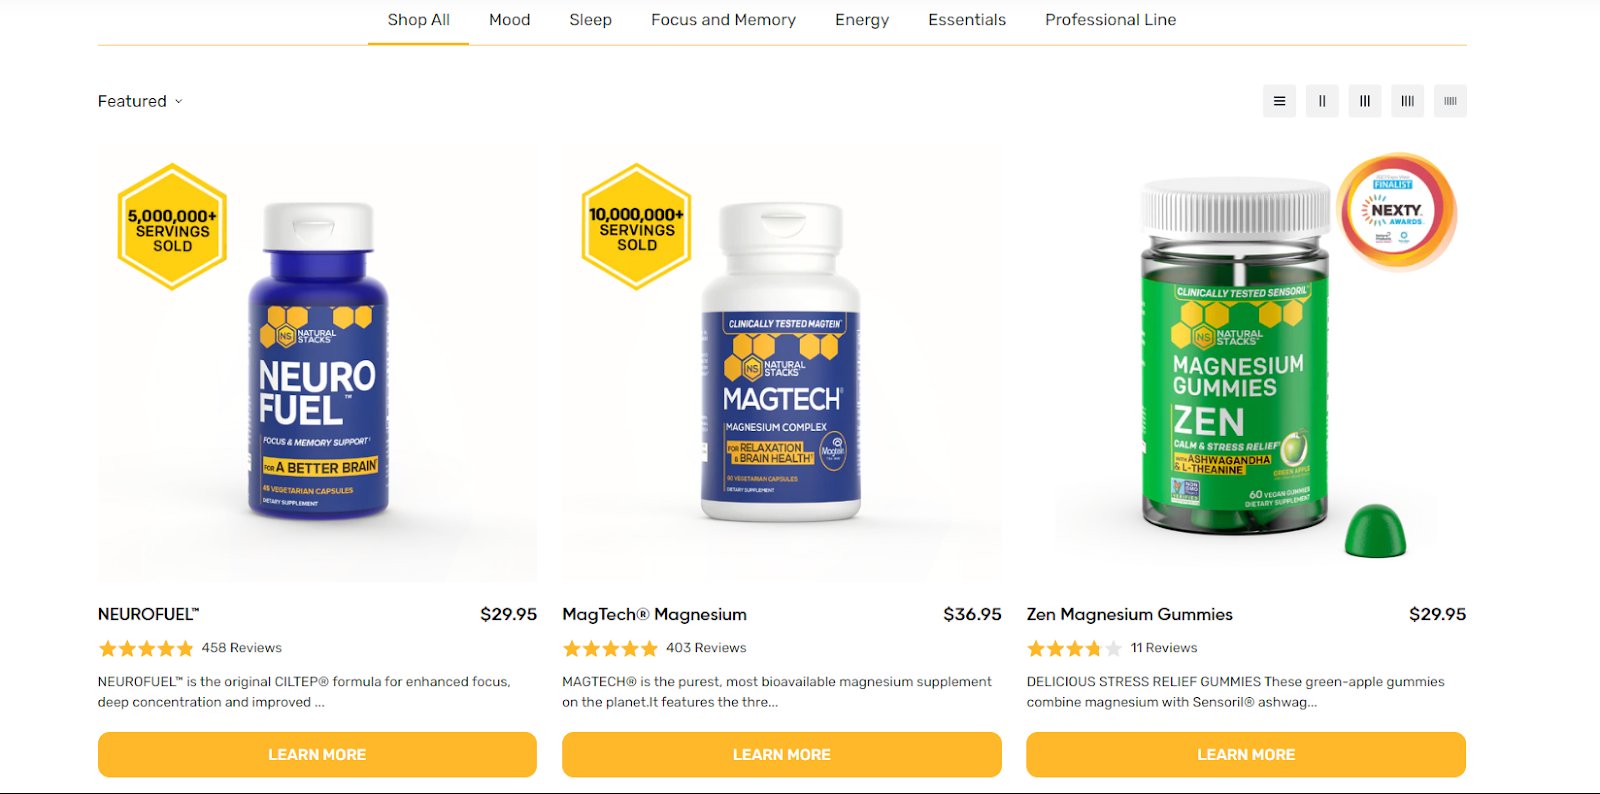 Product pages provide a decent overview of the functional targets of each supplement 